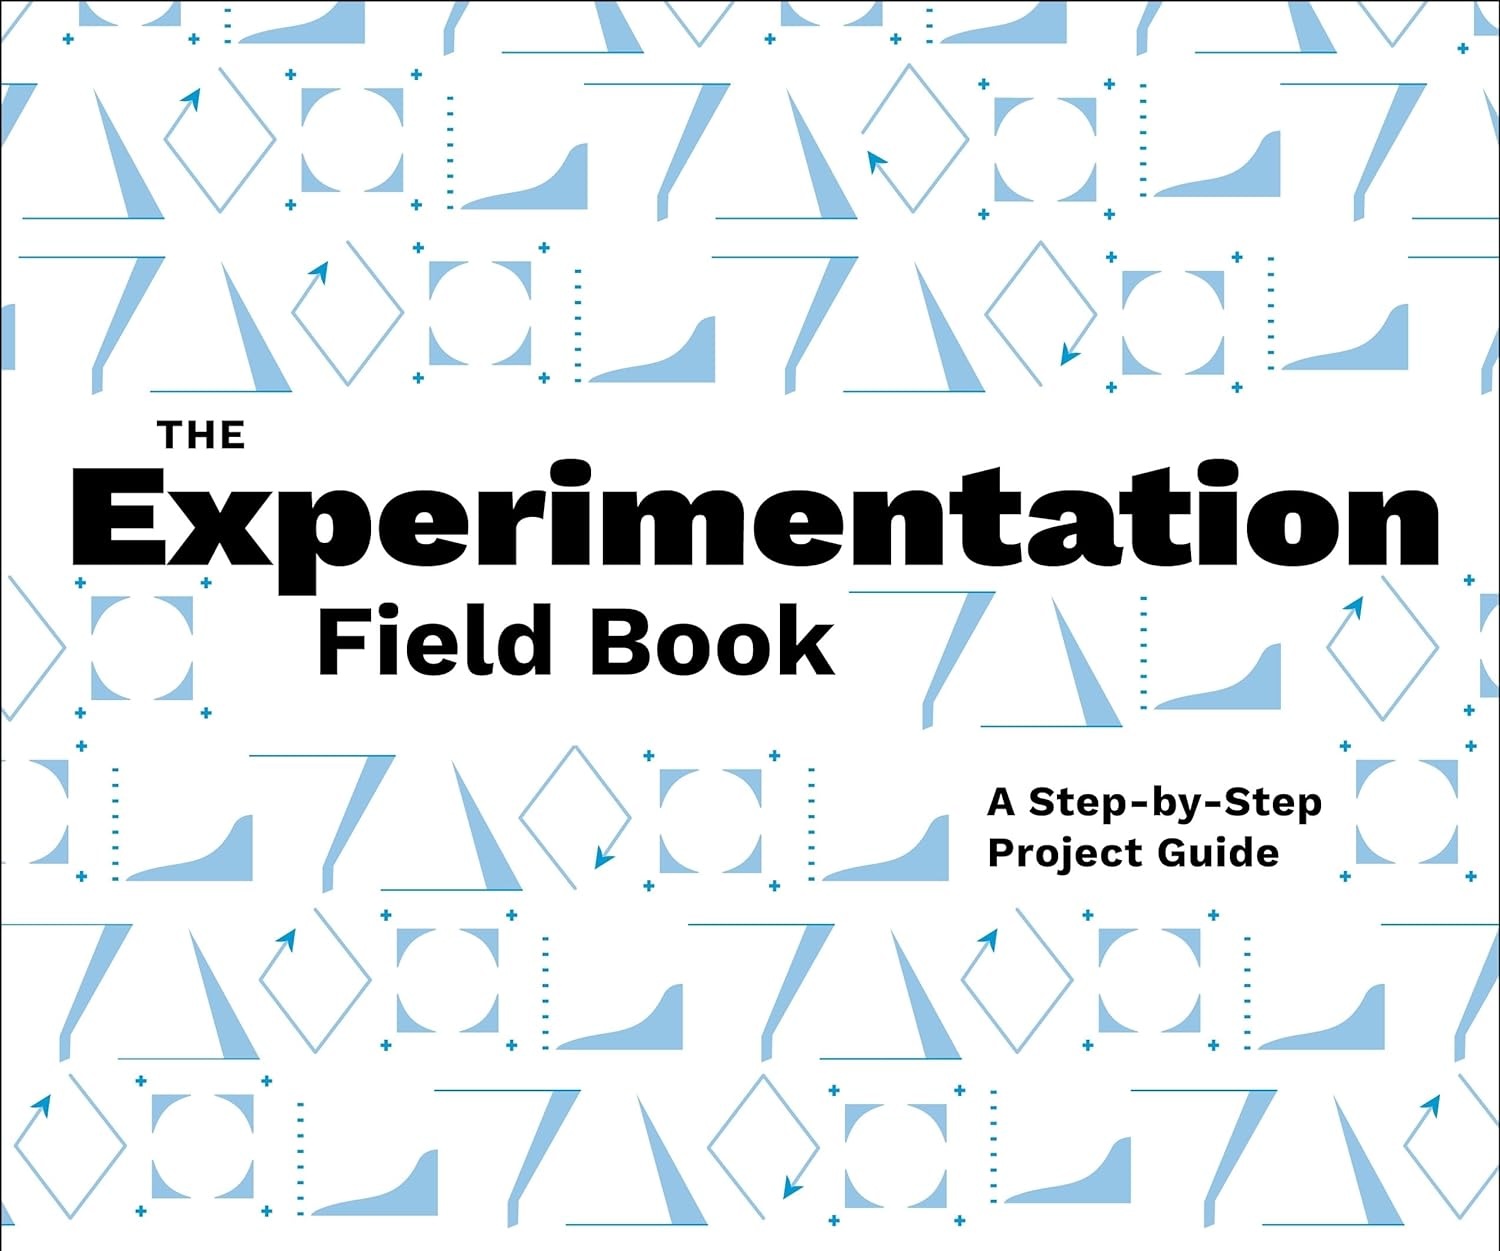 The Experimentation Field Book